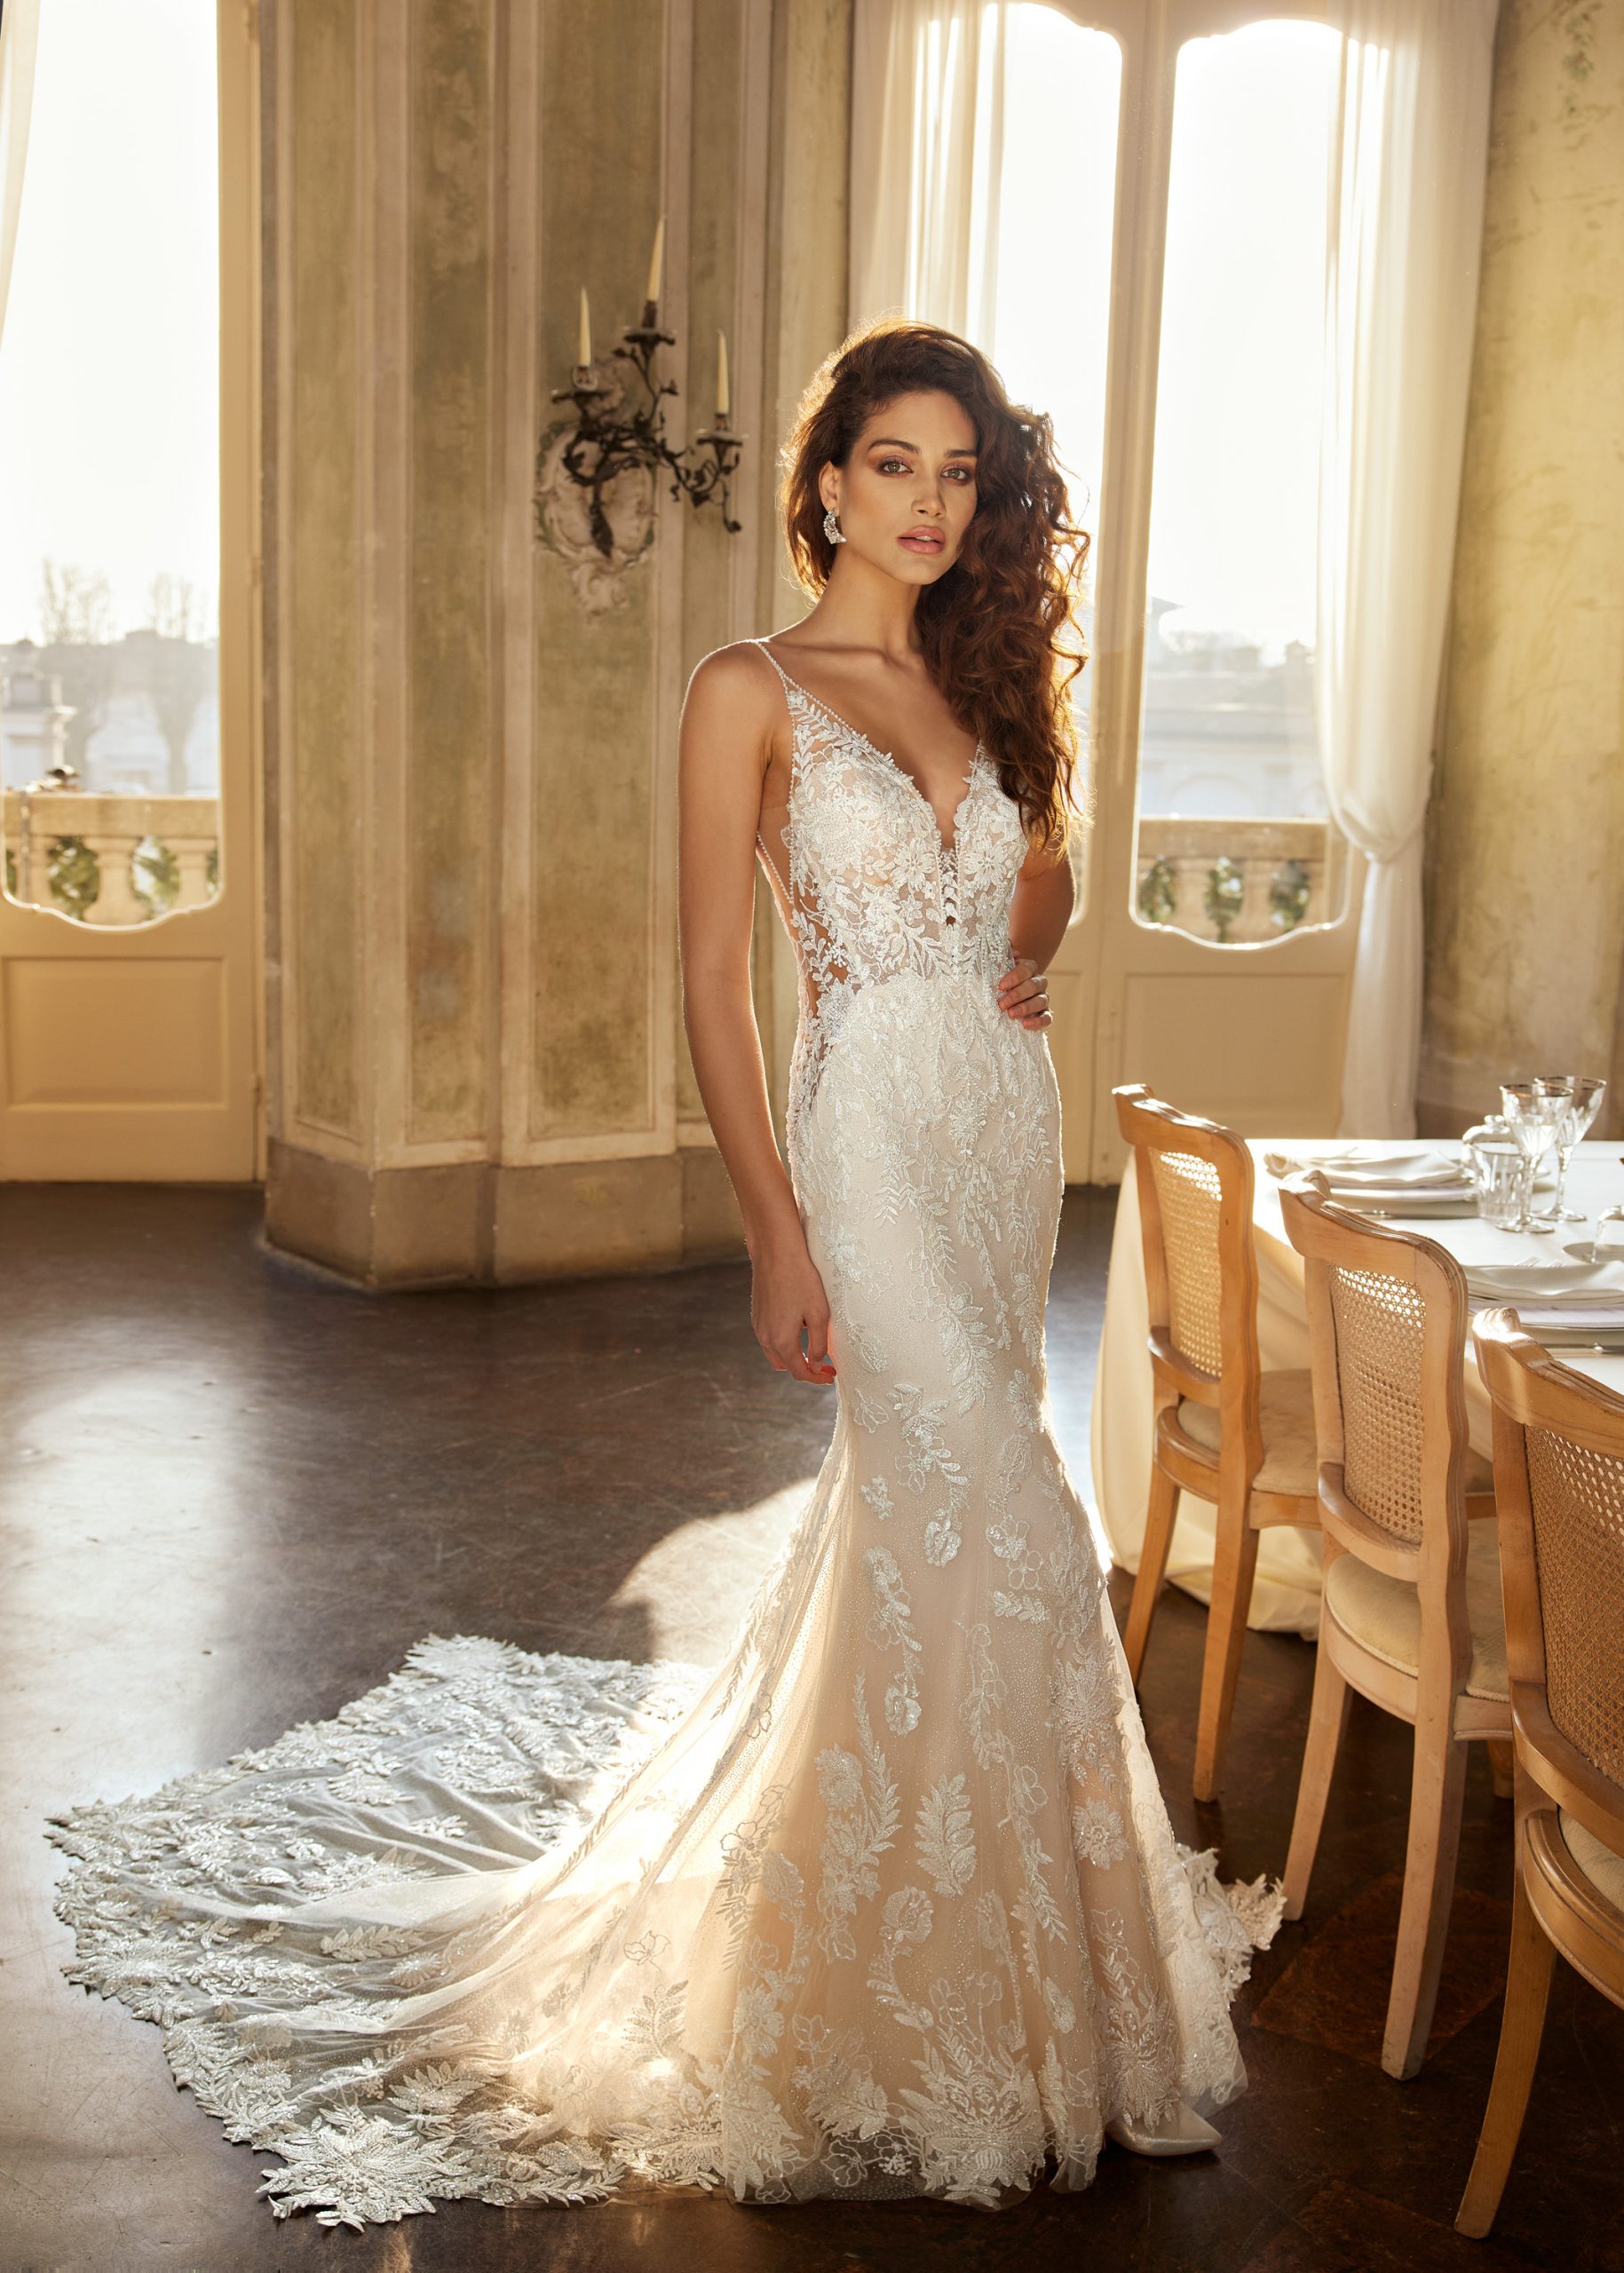 Wedding Dresses & Bridal Gowns - Largest Selection at Kleinfeld Bridal